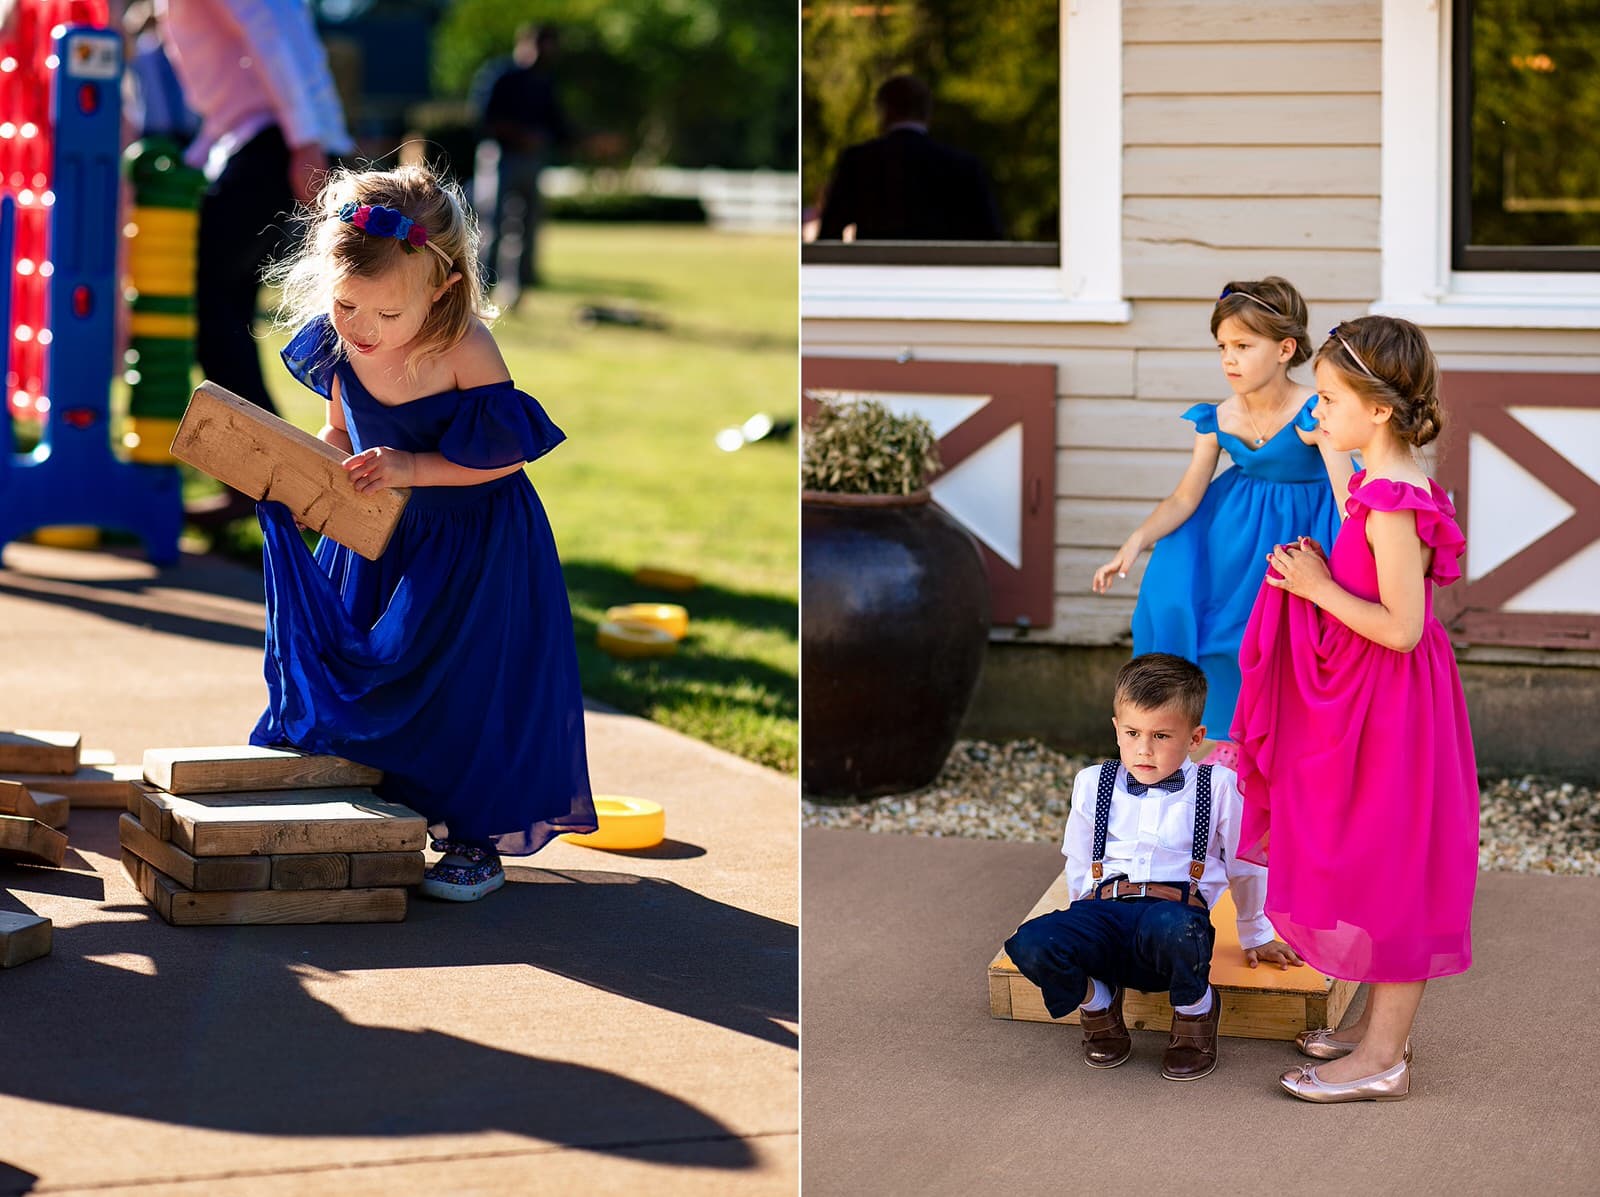 Outdoor reception and cocktail hour ideas - lawn games!